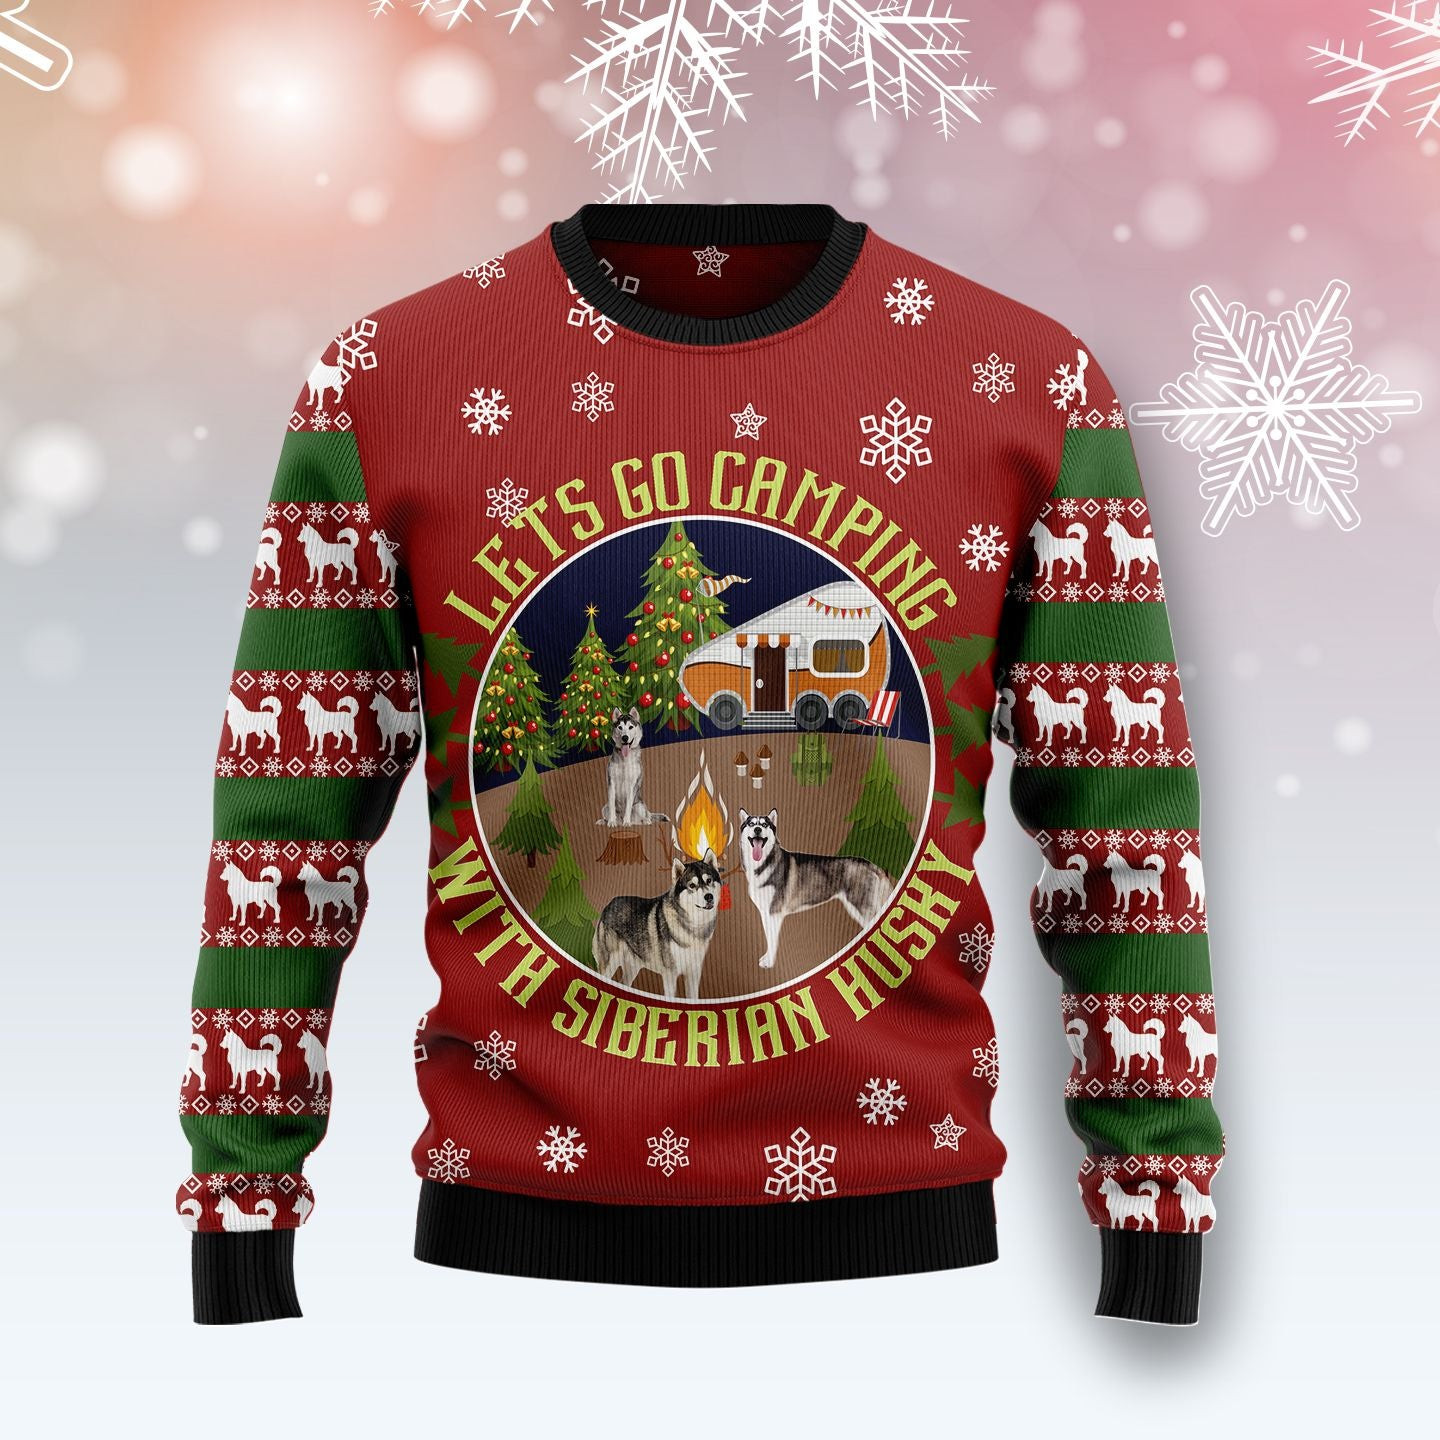 Lets Go Camping With Siberian Husky Ugly Christmas Sweater, Ugly Sweater For Men Women, Holiday Sweater